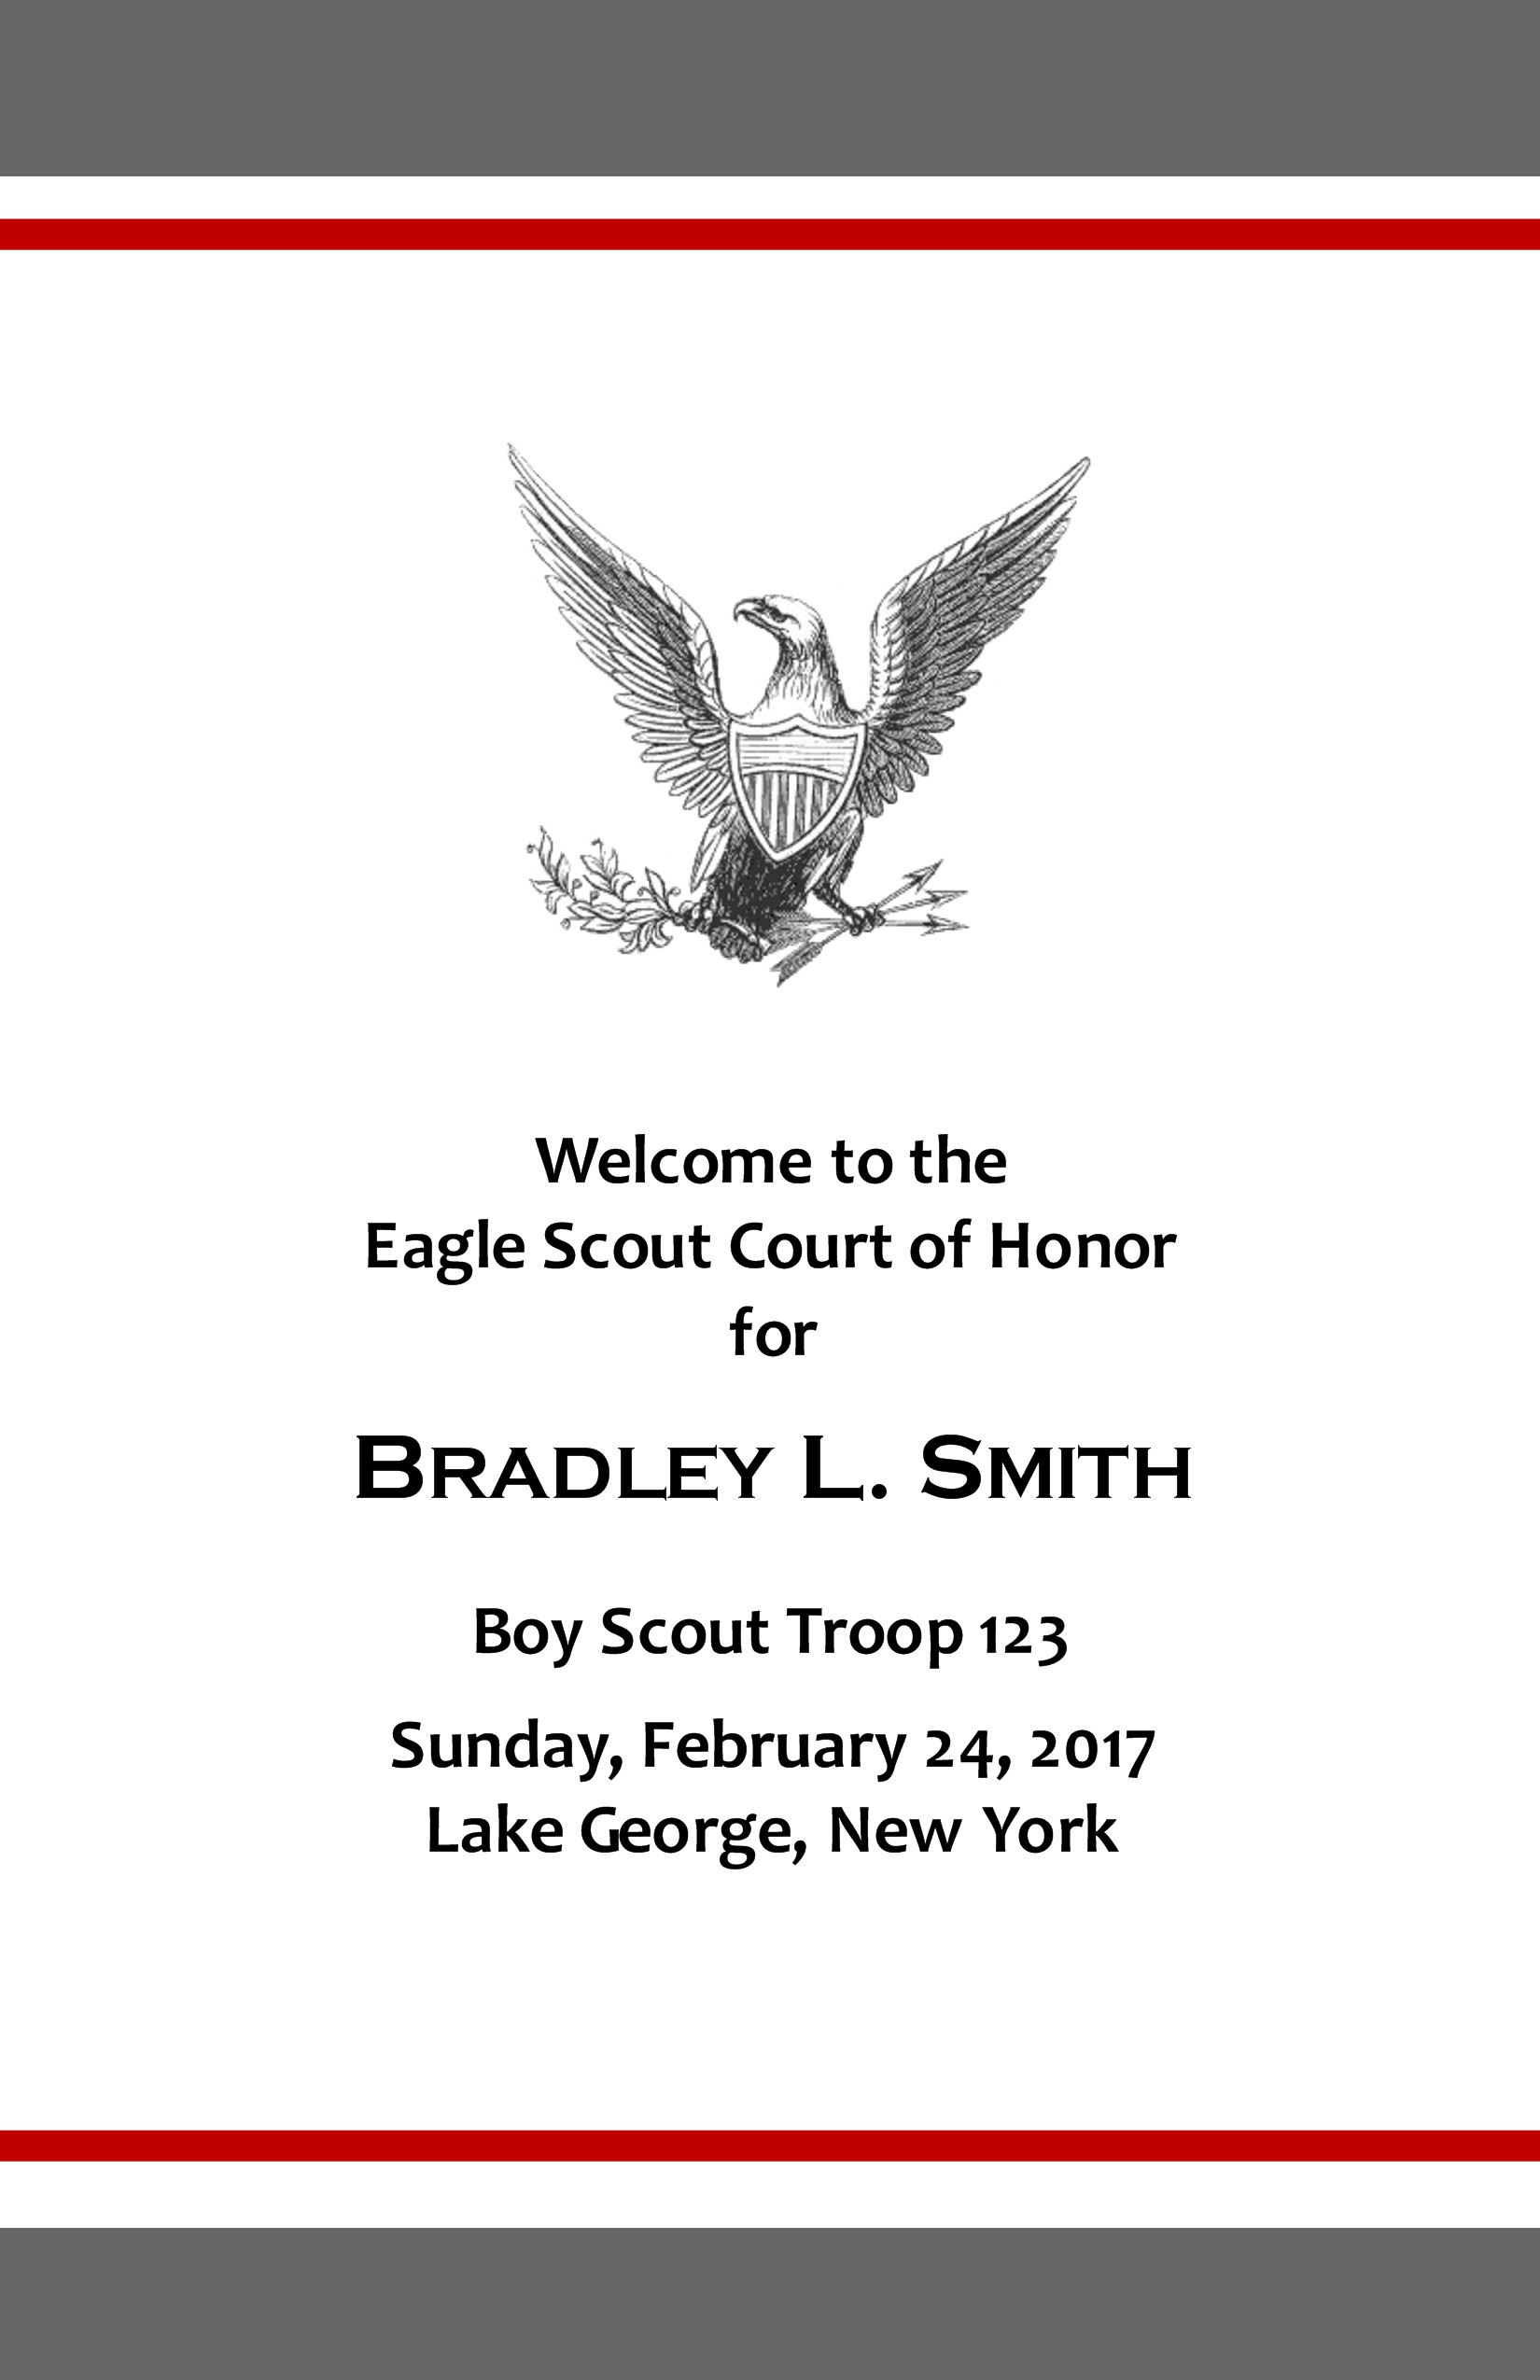 Dedicated Scout Grey Eagle Scout Court of Honor Program